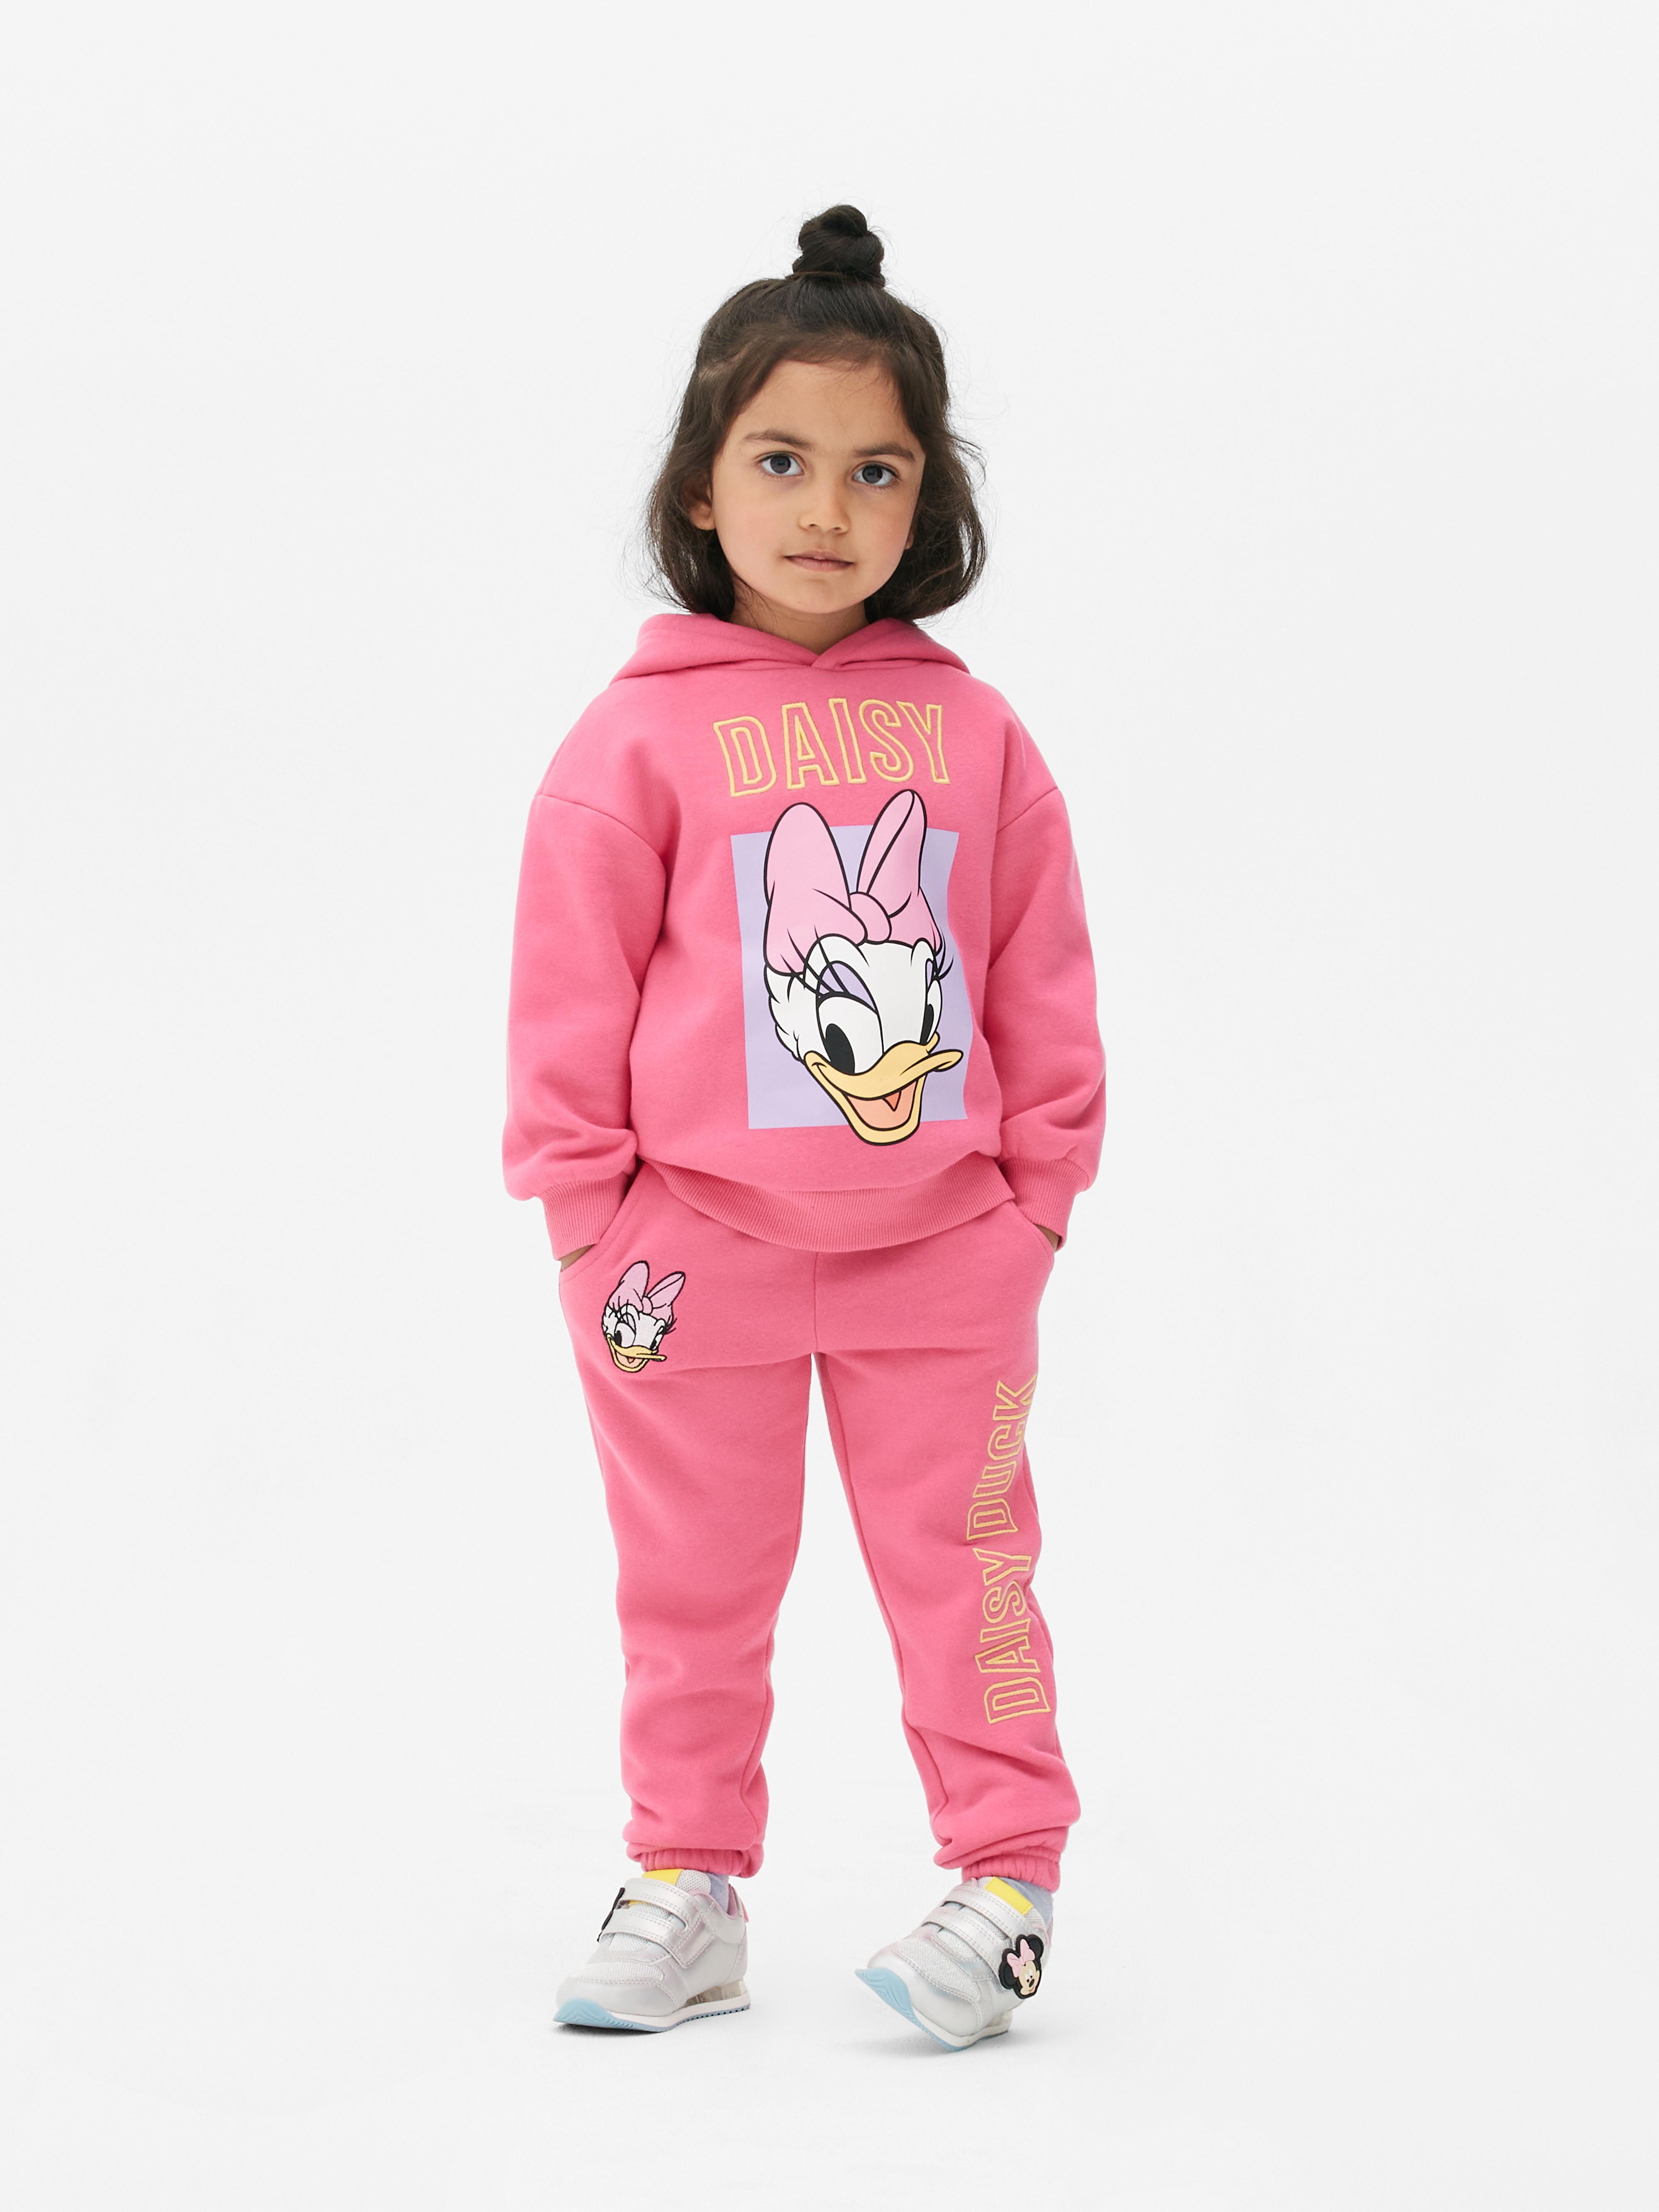 Disney's Daisy Duck Hoodie and Joggers Set